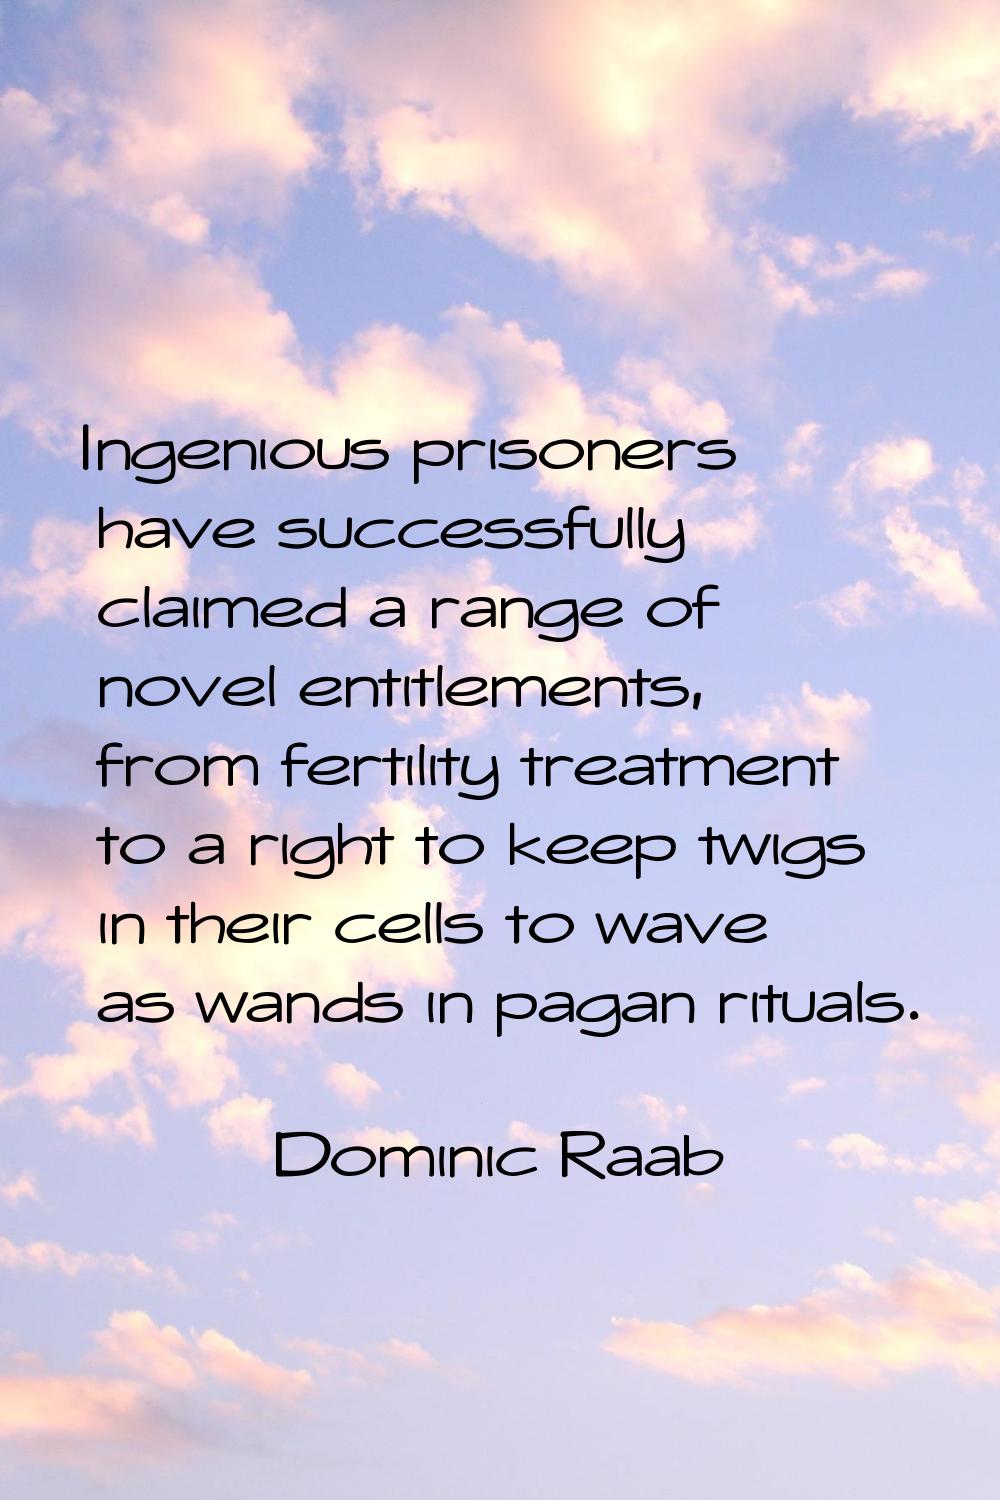 Ingenious prisoners have successfully claimed a range of novel entitlements, from fertility treatme